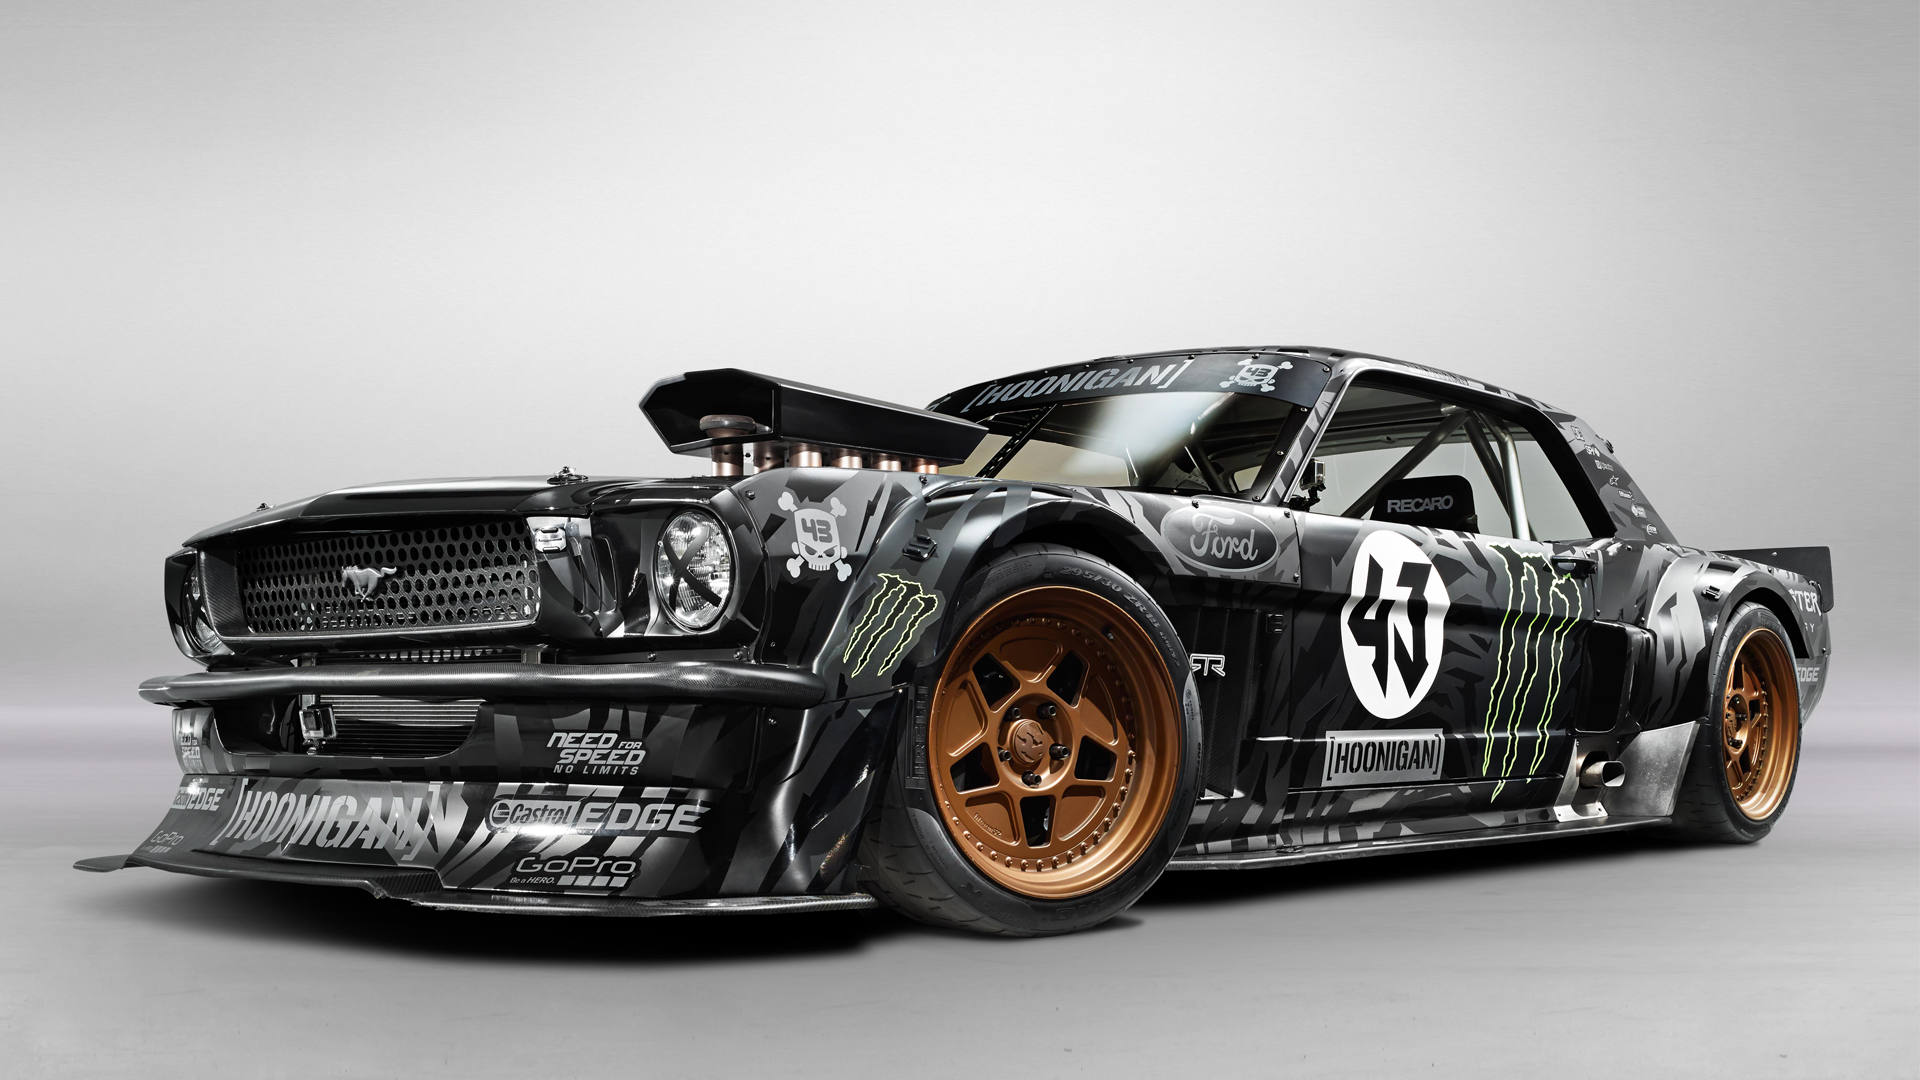 General 1920x1080 Ken Block Ford Mustang drift car vehicle black cars supercharger American cars muscle cars livery simple background